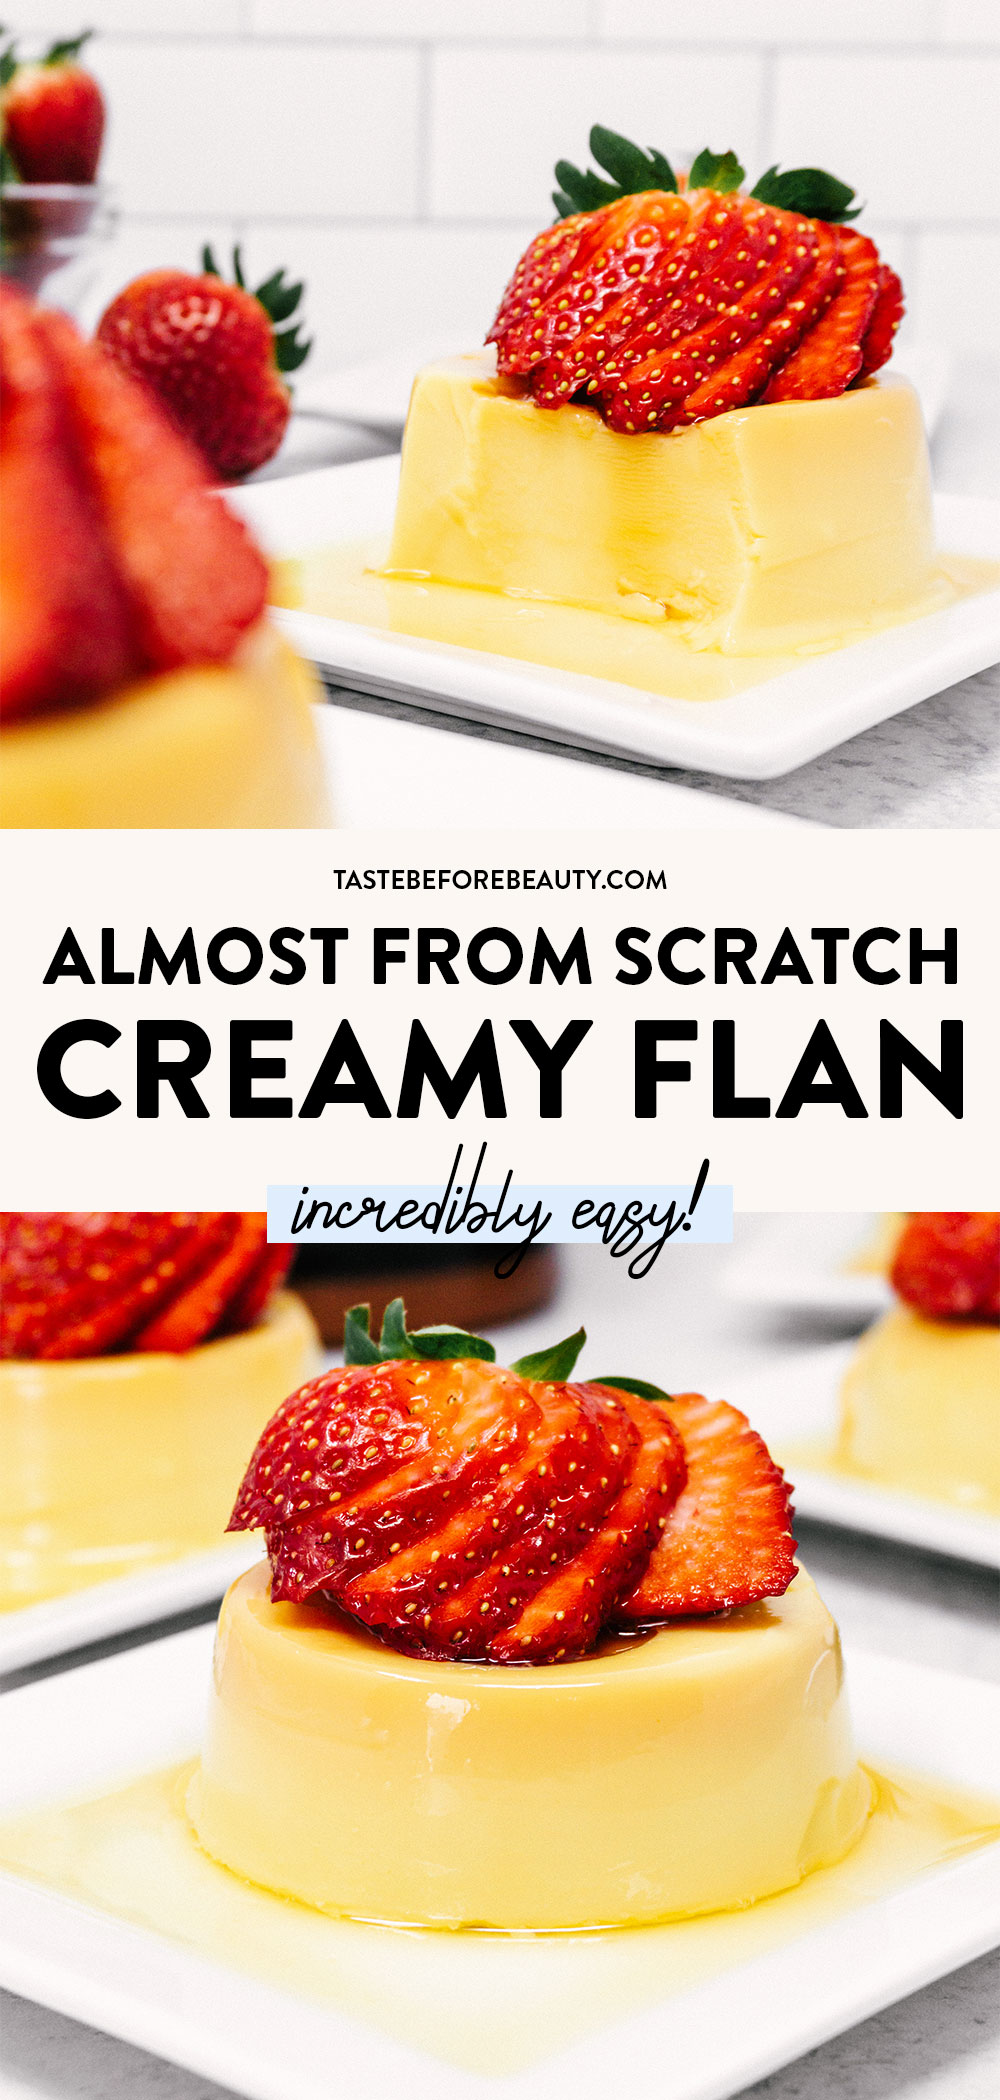 creamy flan with strawberries pinterest pin